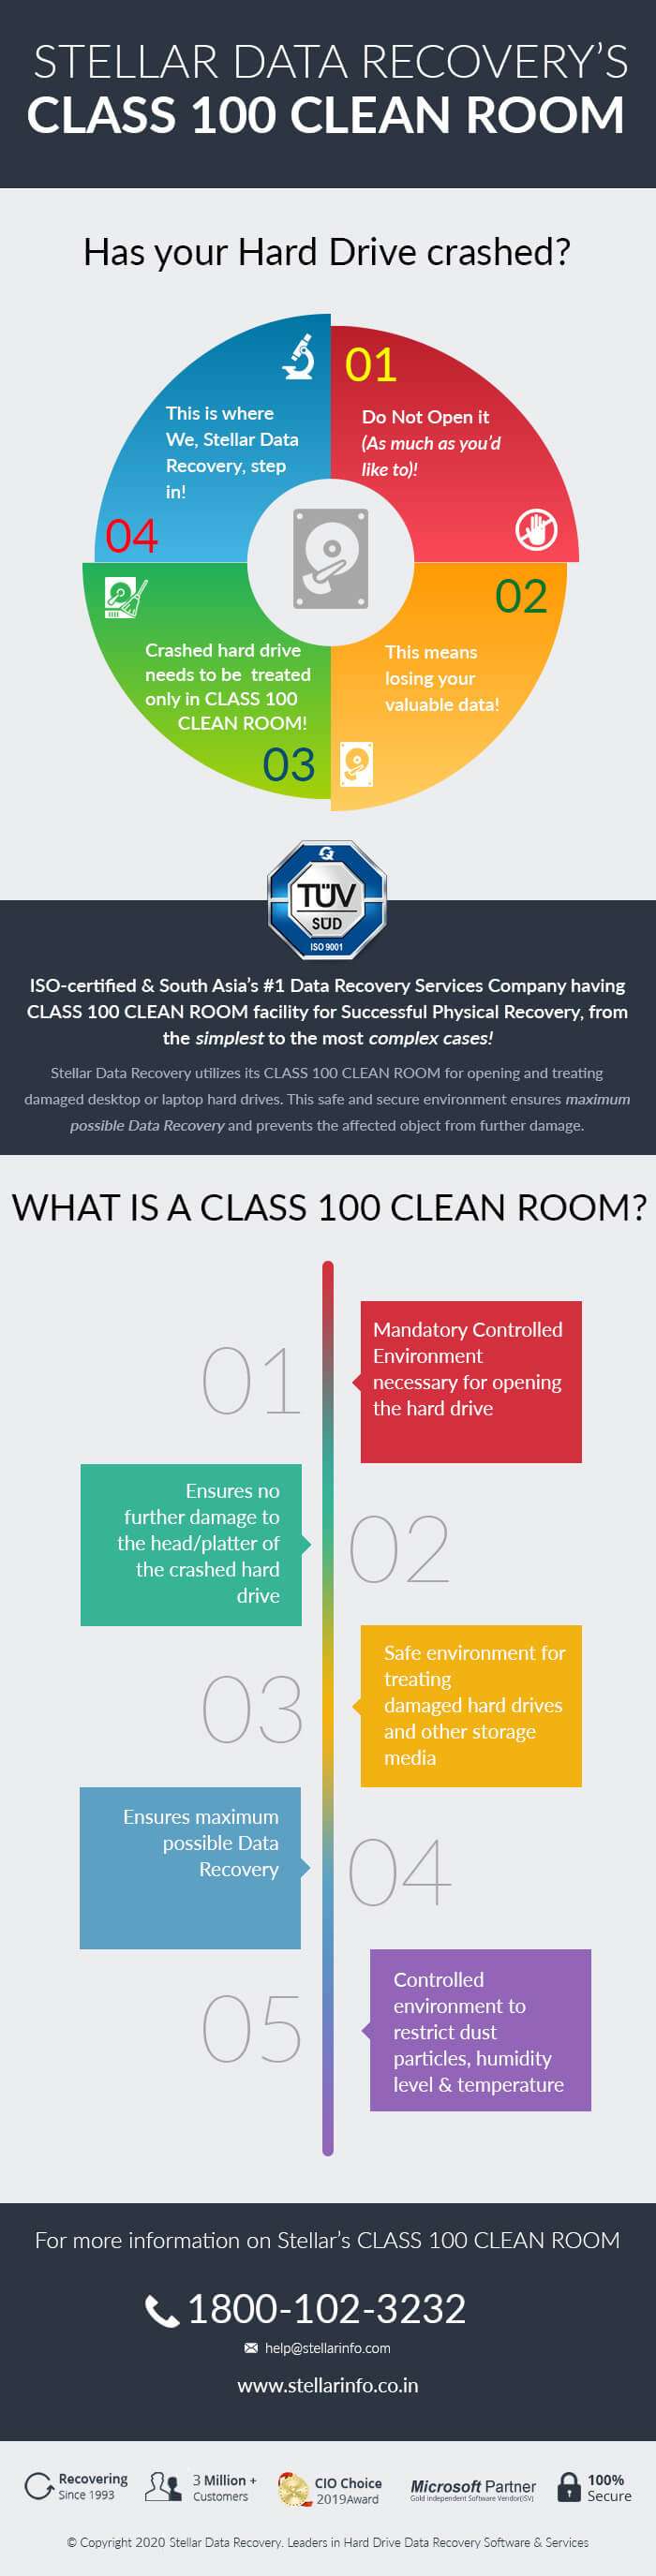 Class 100 Clean Room infographic